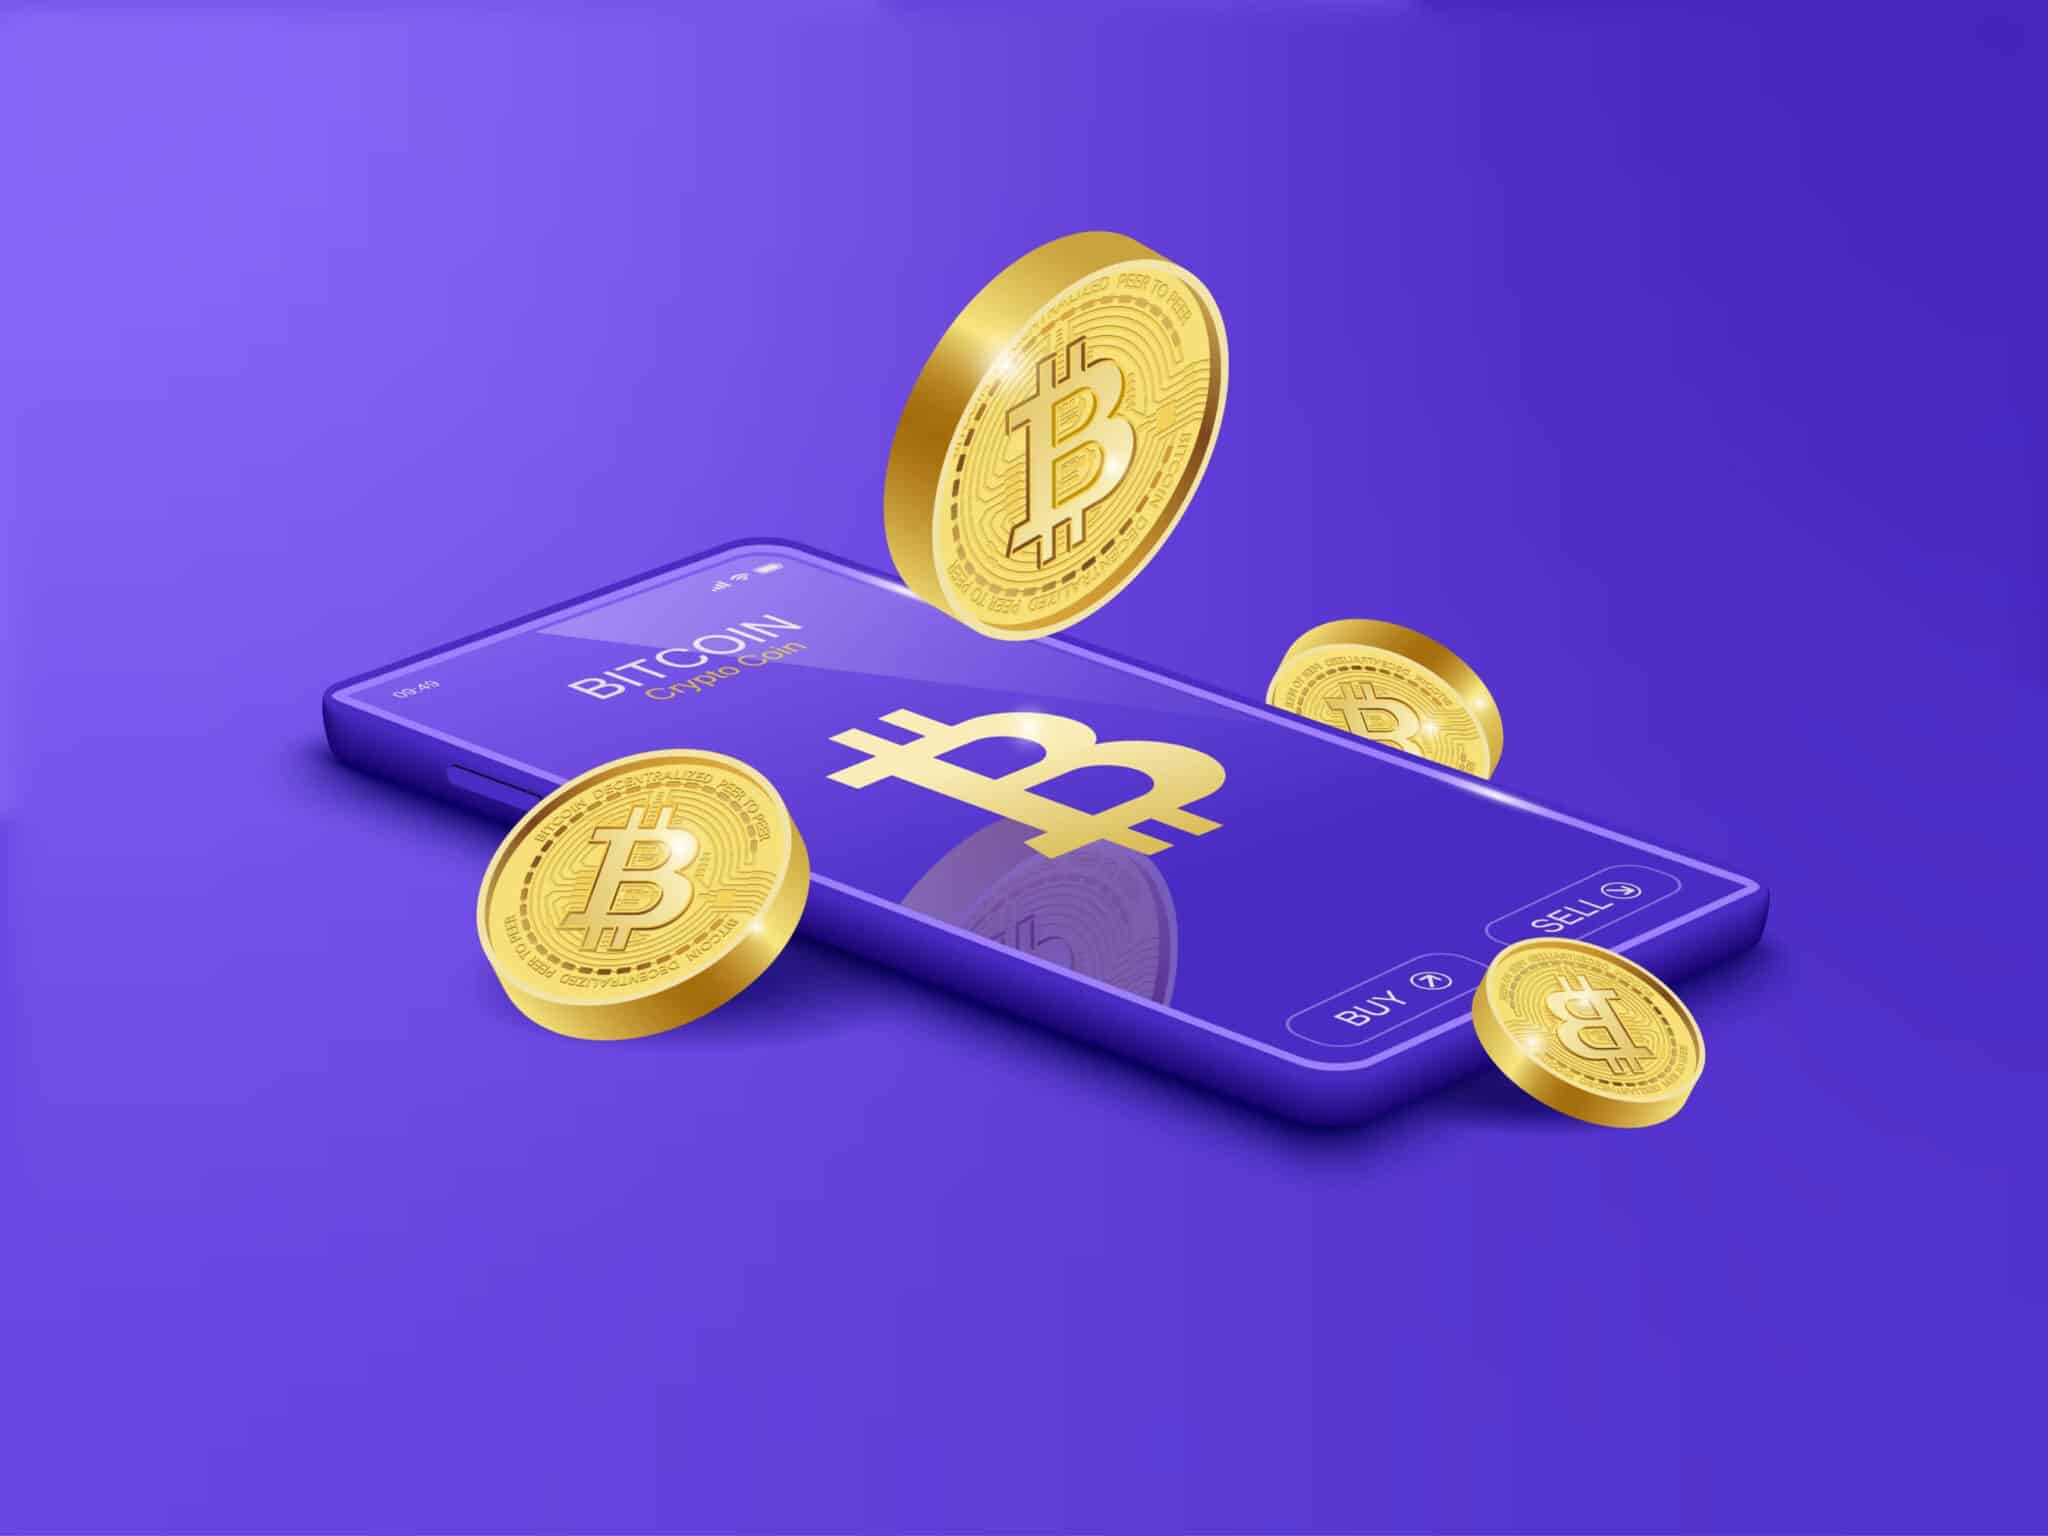 Illustration of Bitcoin displayed on a phone on a bright purple background